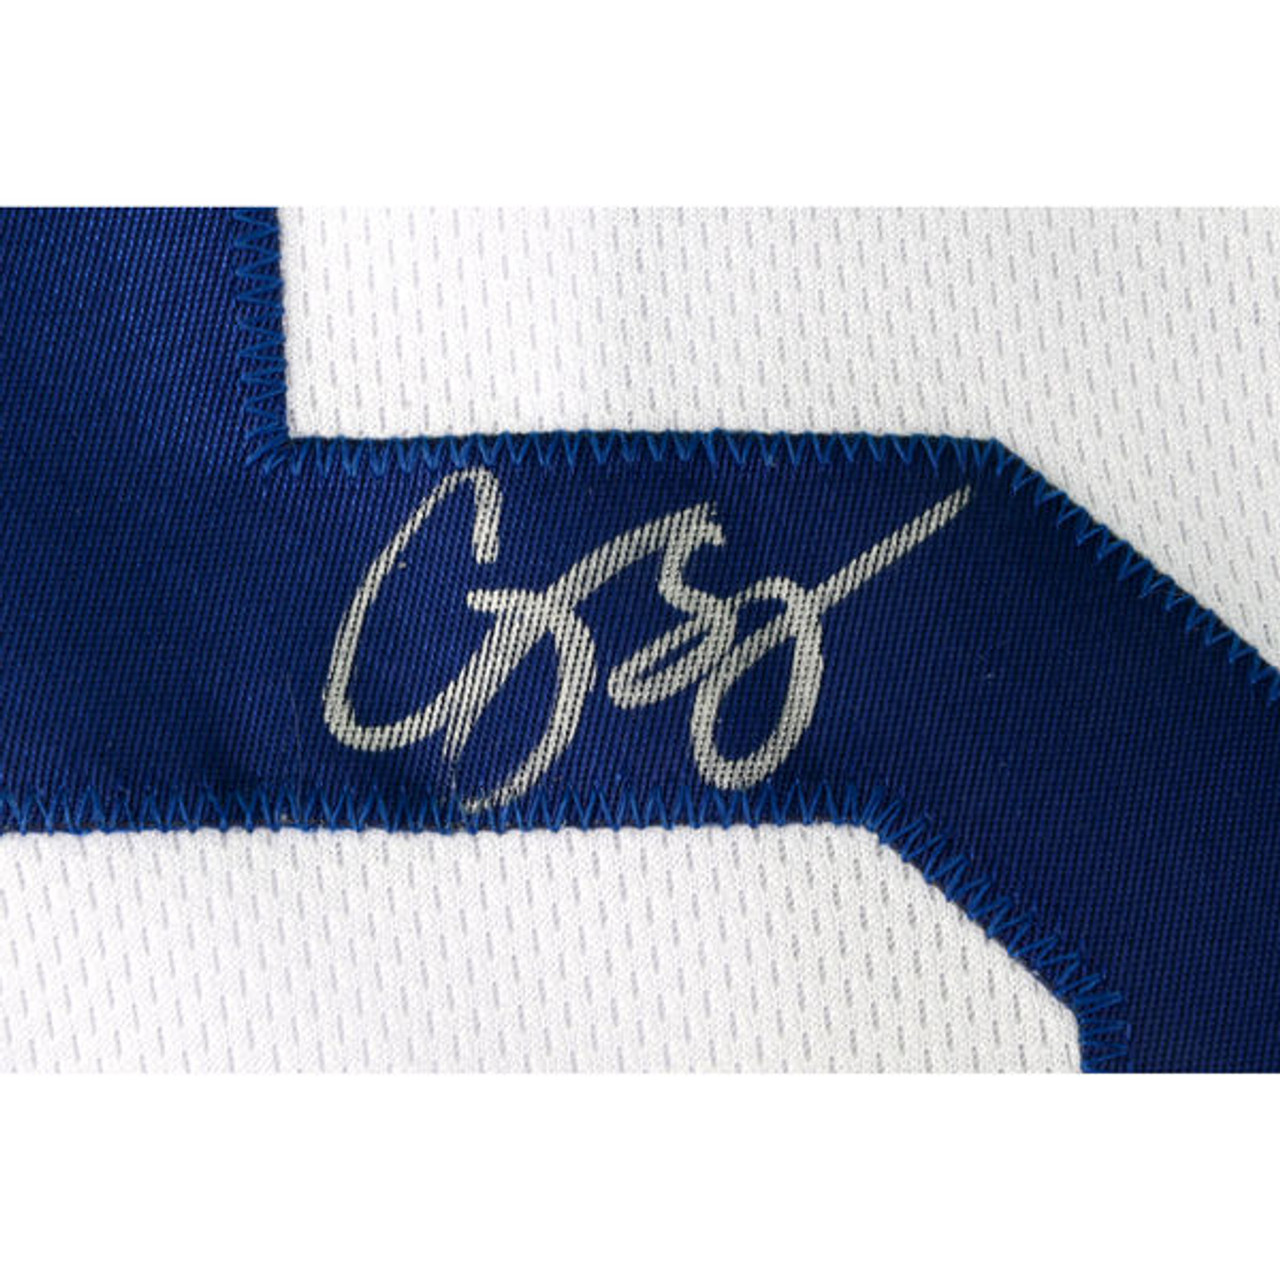 MOOKIE BETTS Autographed Los Angeles Dodgers Authentic Blue Jersey FANATICS  - Game Day Legends